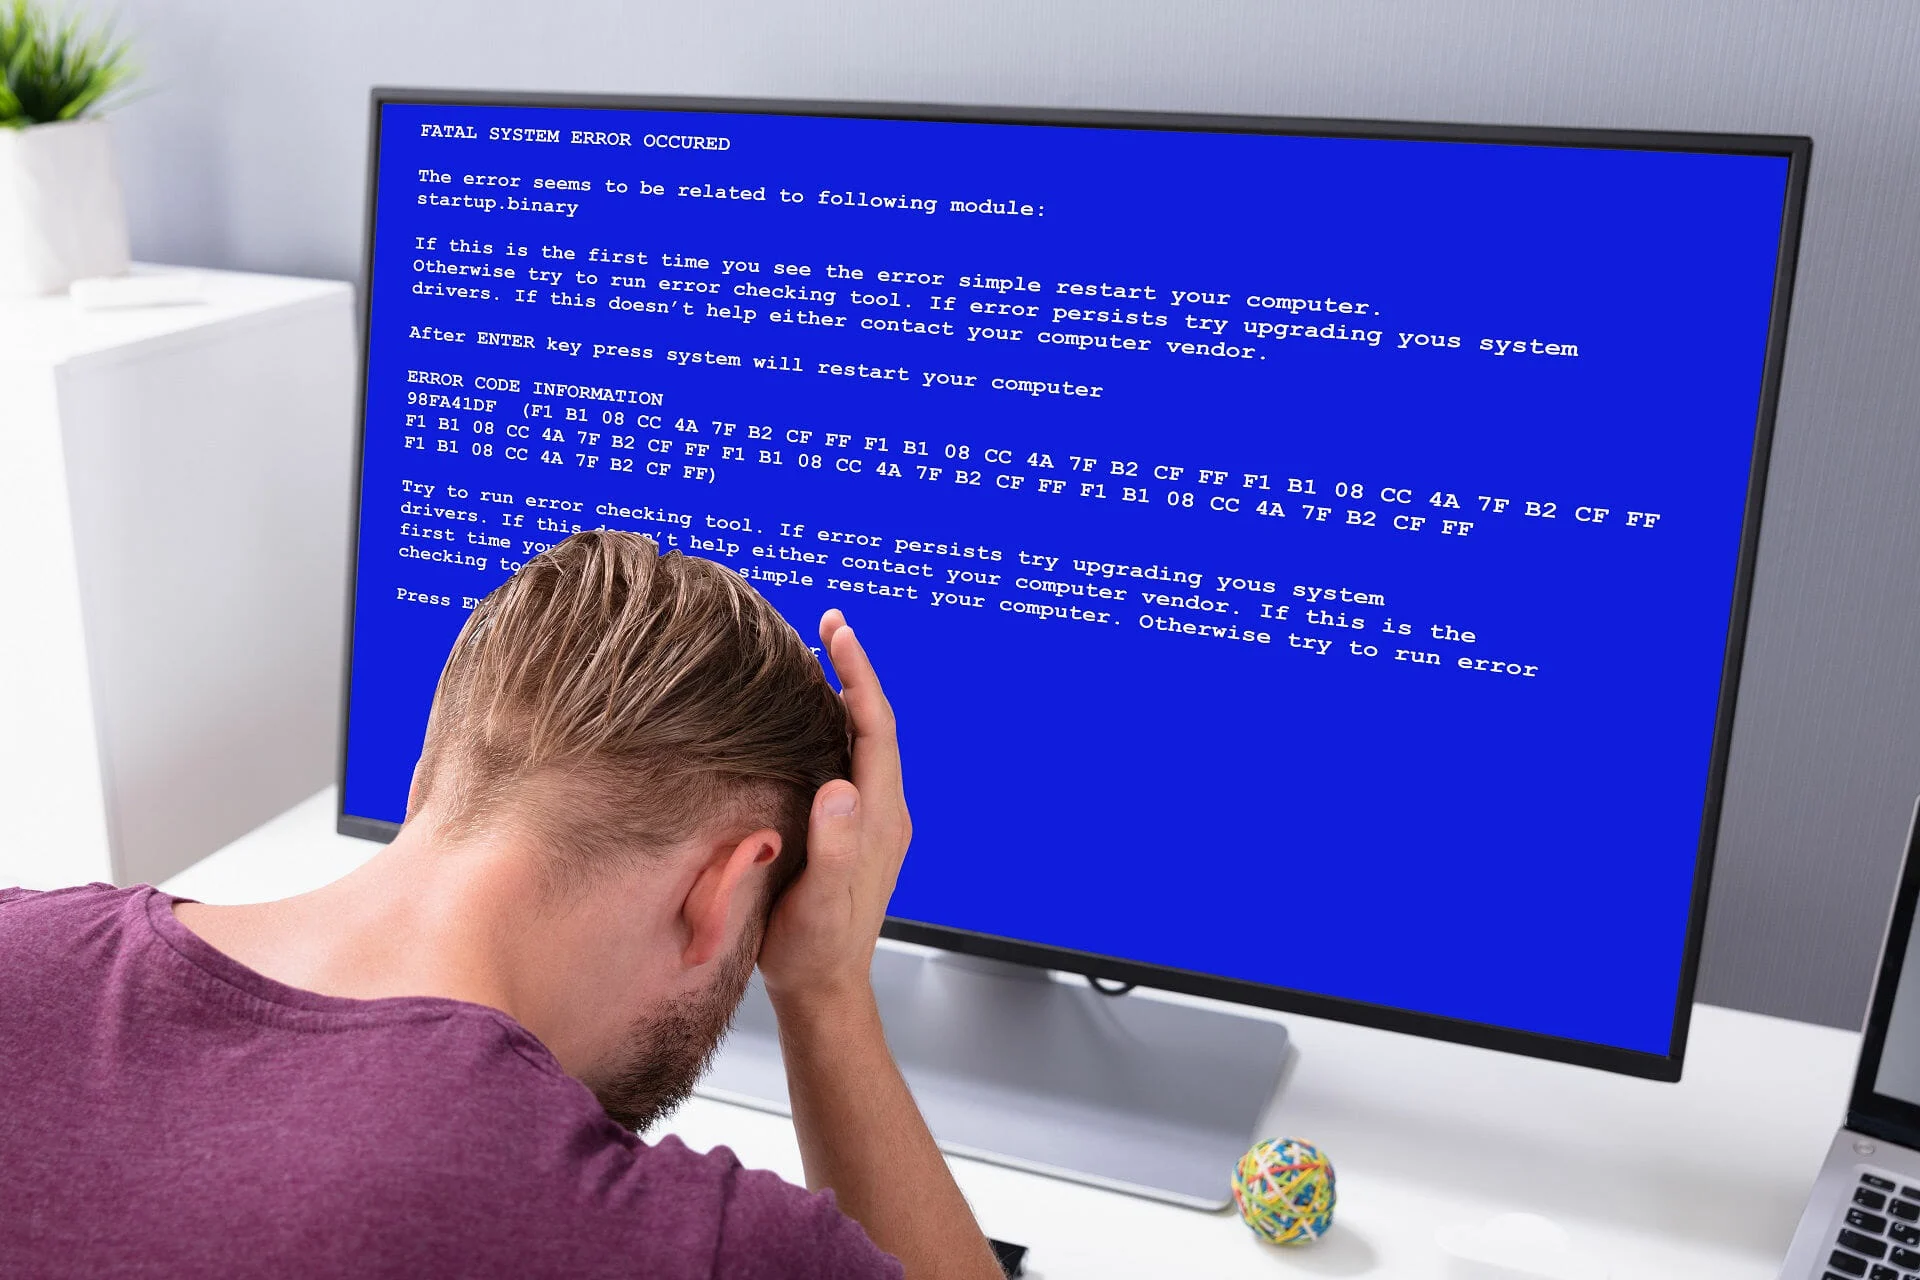 What Is A System Error Code? (System Error Message)